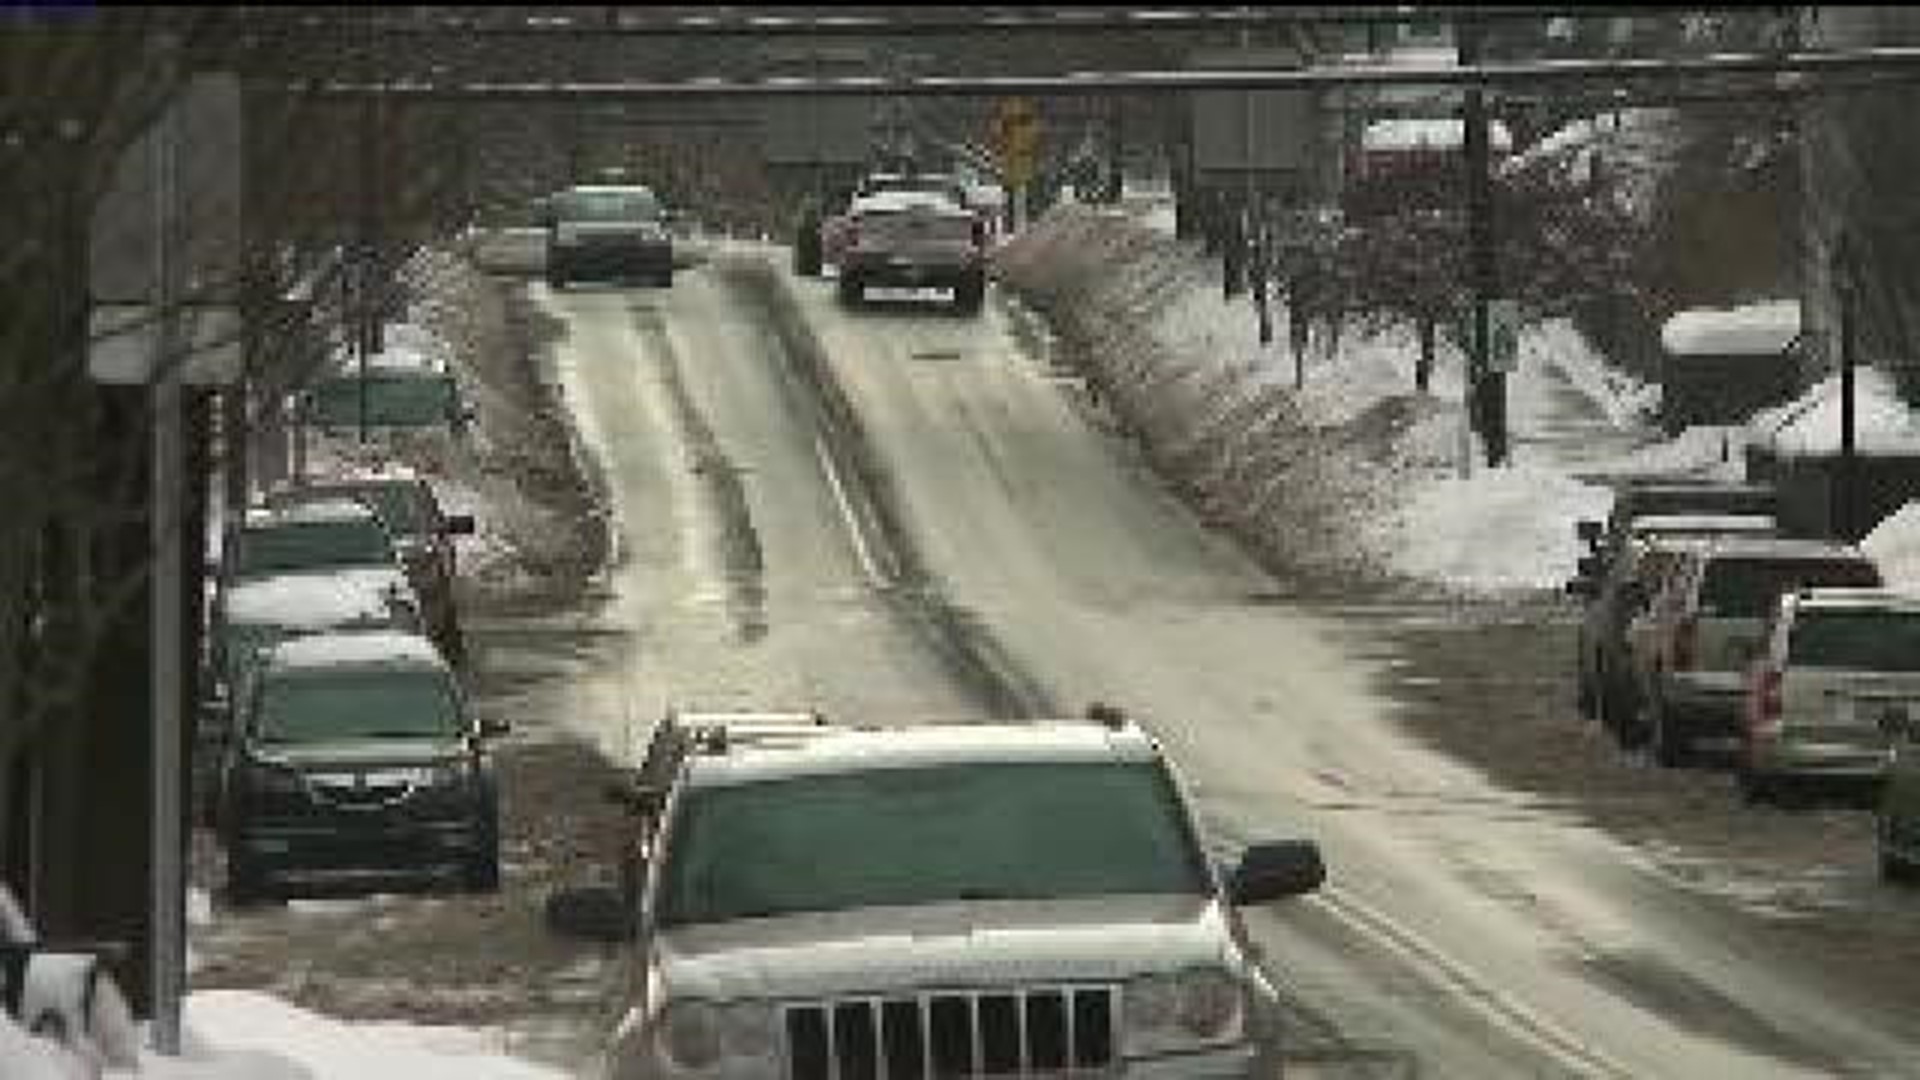 Wyoming County Digs Out After Another Storm